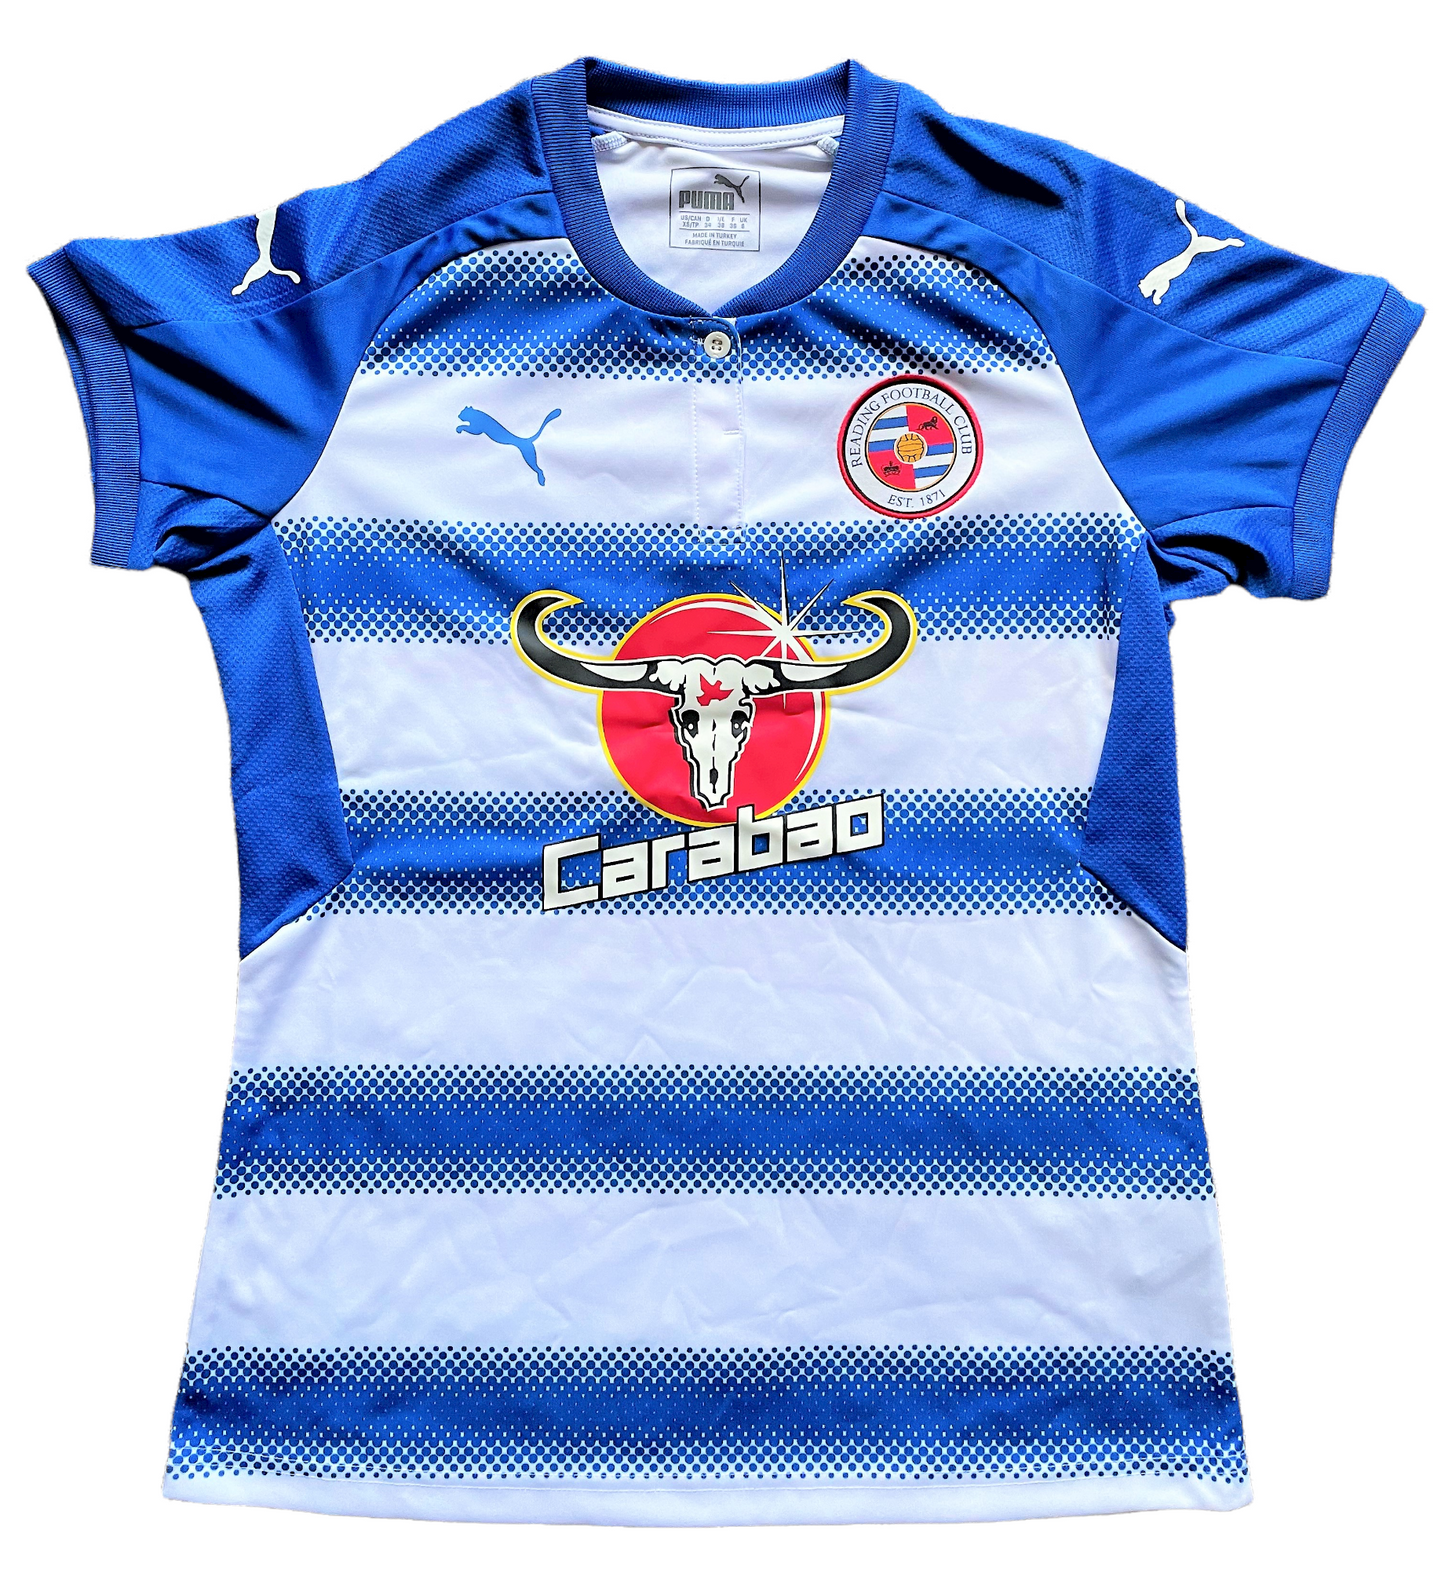 2017-18 Reading Home Shirt (excellent) Ladies size 8